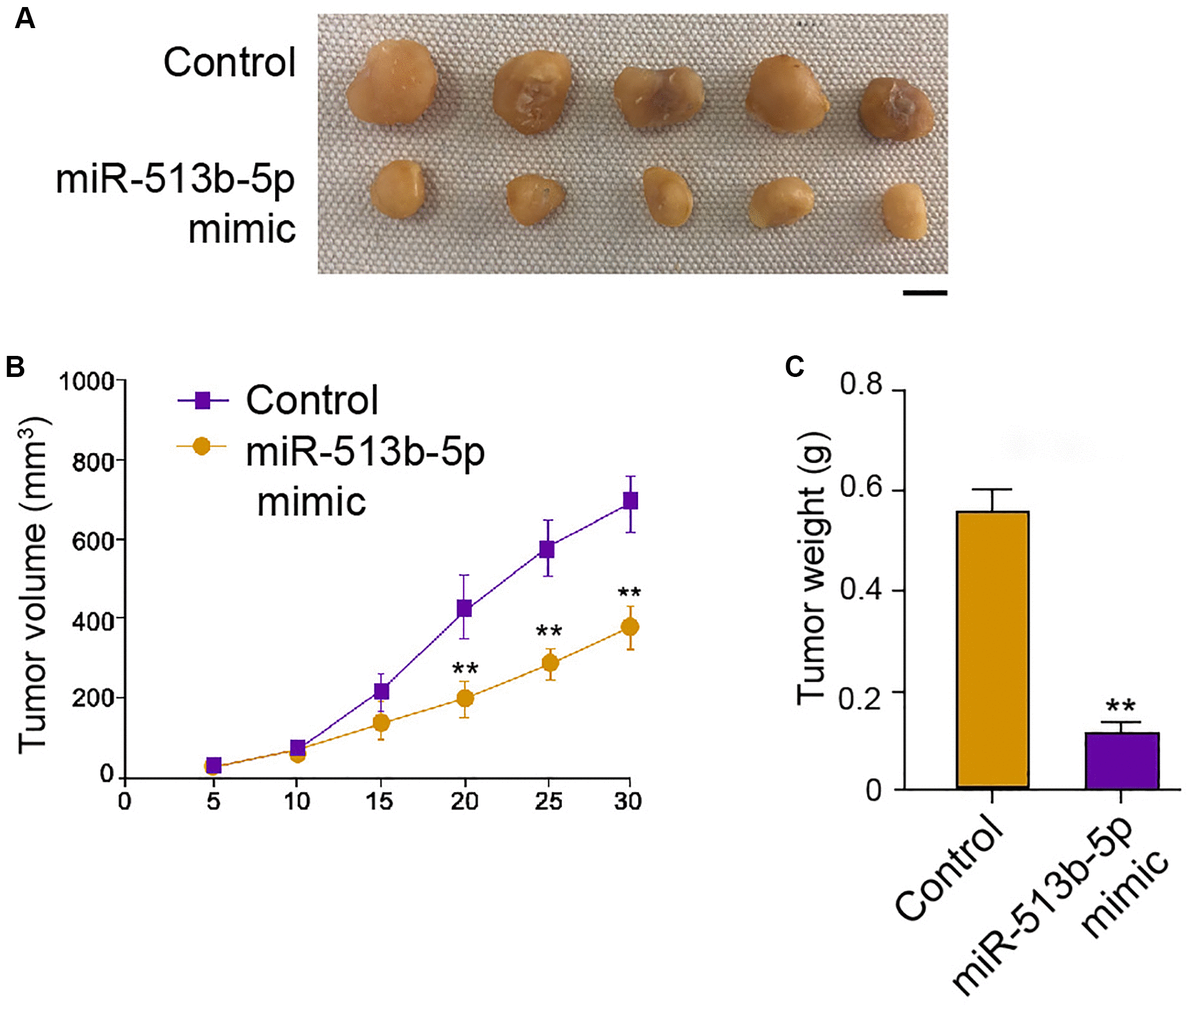 MiR-513b-5p reduces tumor growth of liver cancer cells in vivo. (A–C) The analysis of tumor growth of HepG2 cells treated with miR-513b-5p mimic using tumorigenicity assays in the nude mice. The tumor size (Scale bar = 10 mm), tumor weight, and tumor volume were shown.